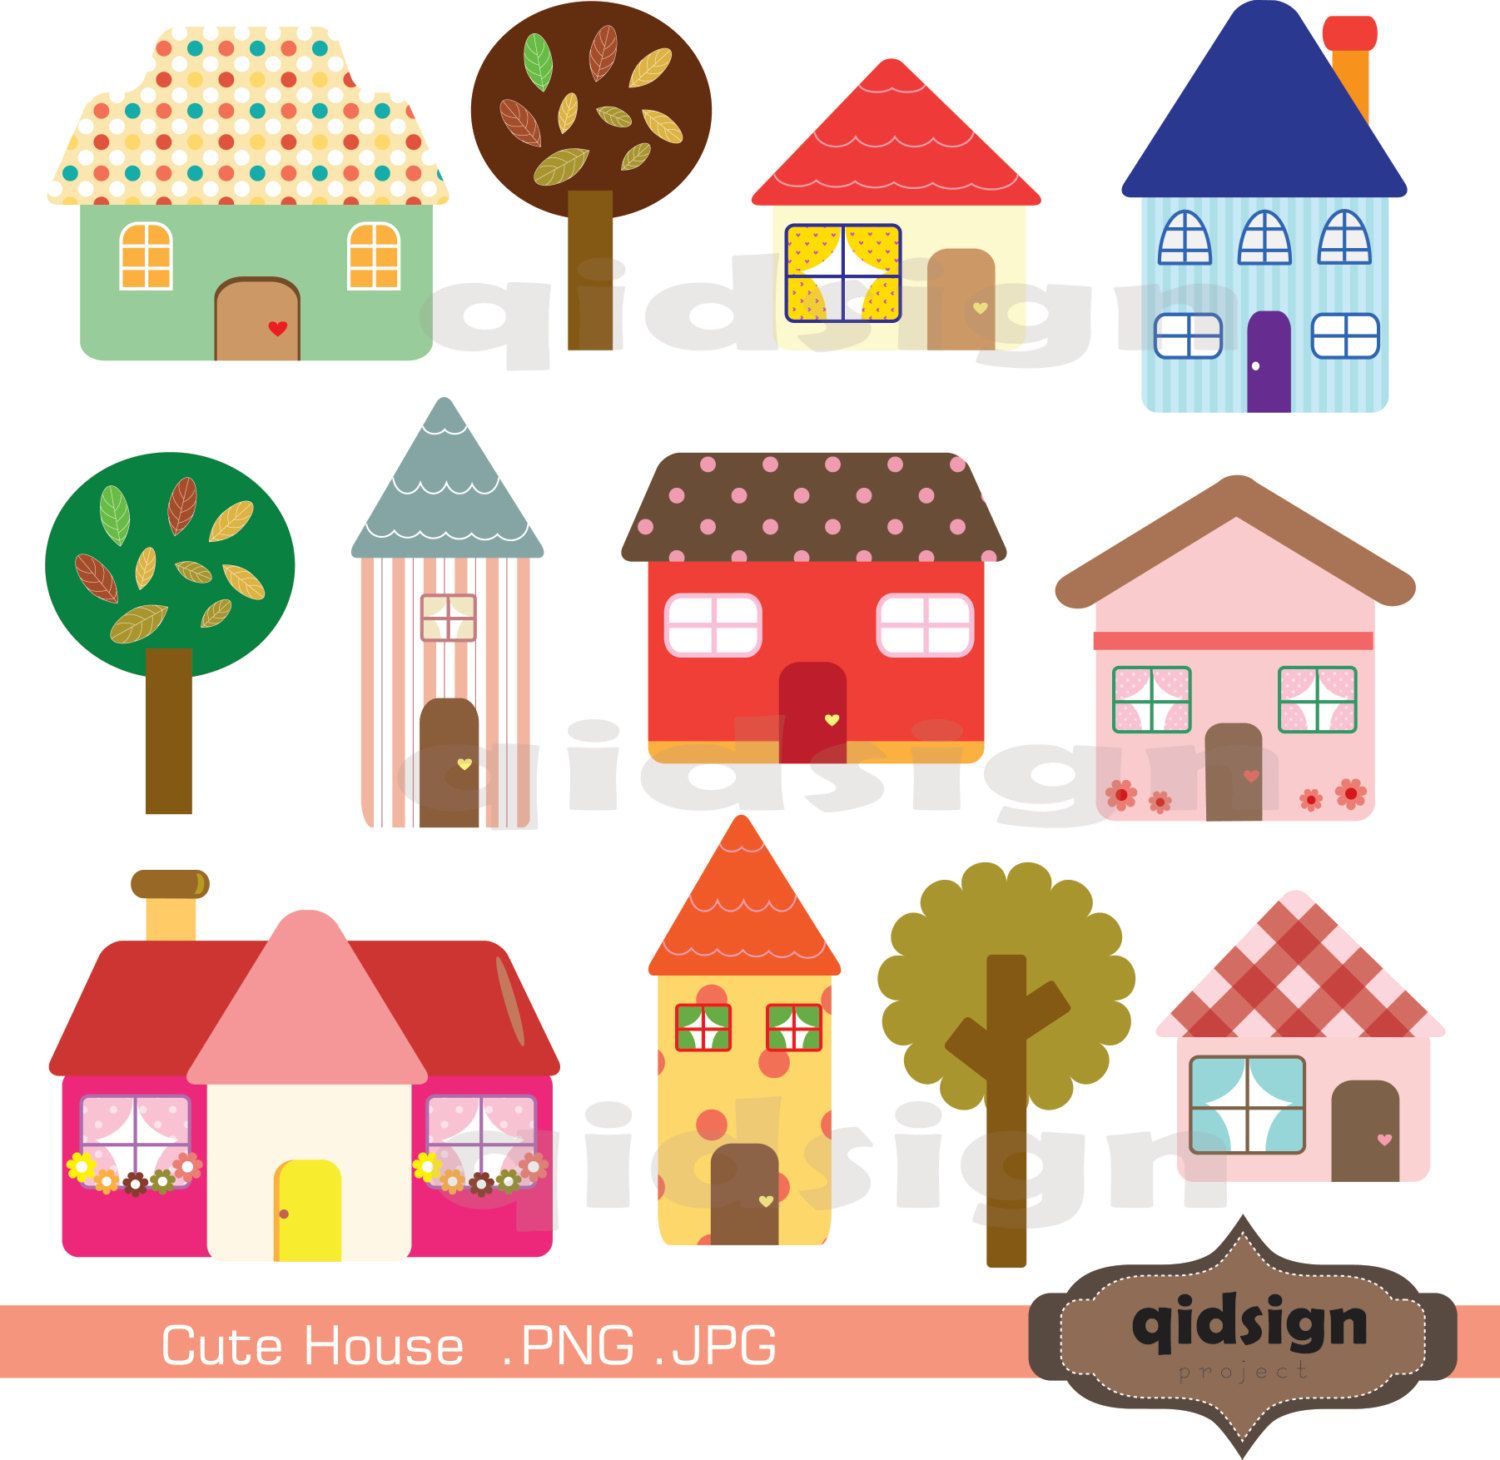 Cute House Clipart Personal and Commercial by qidsignproject